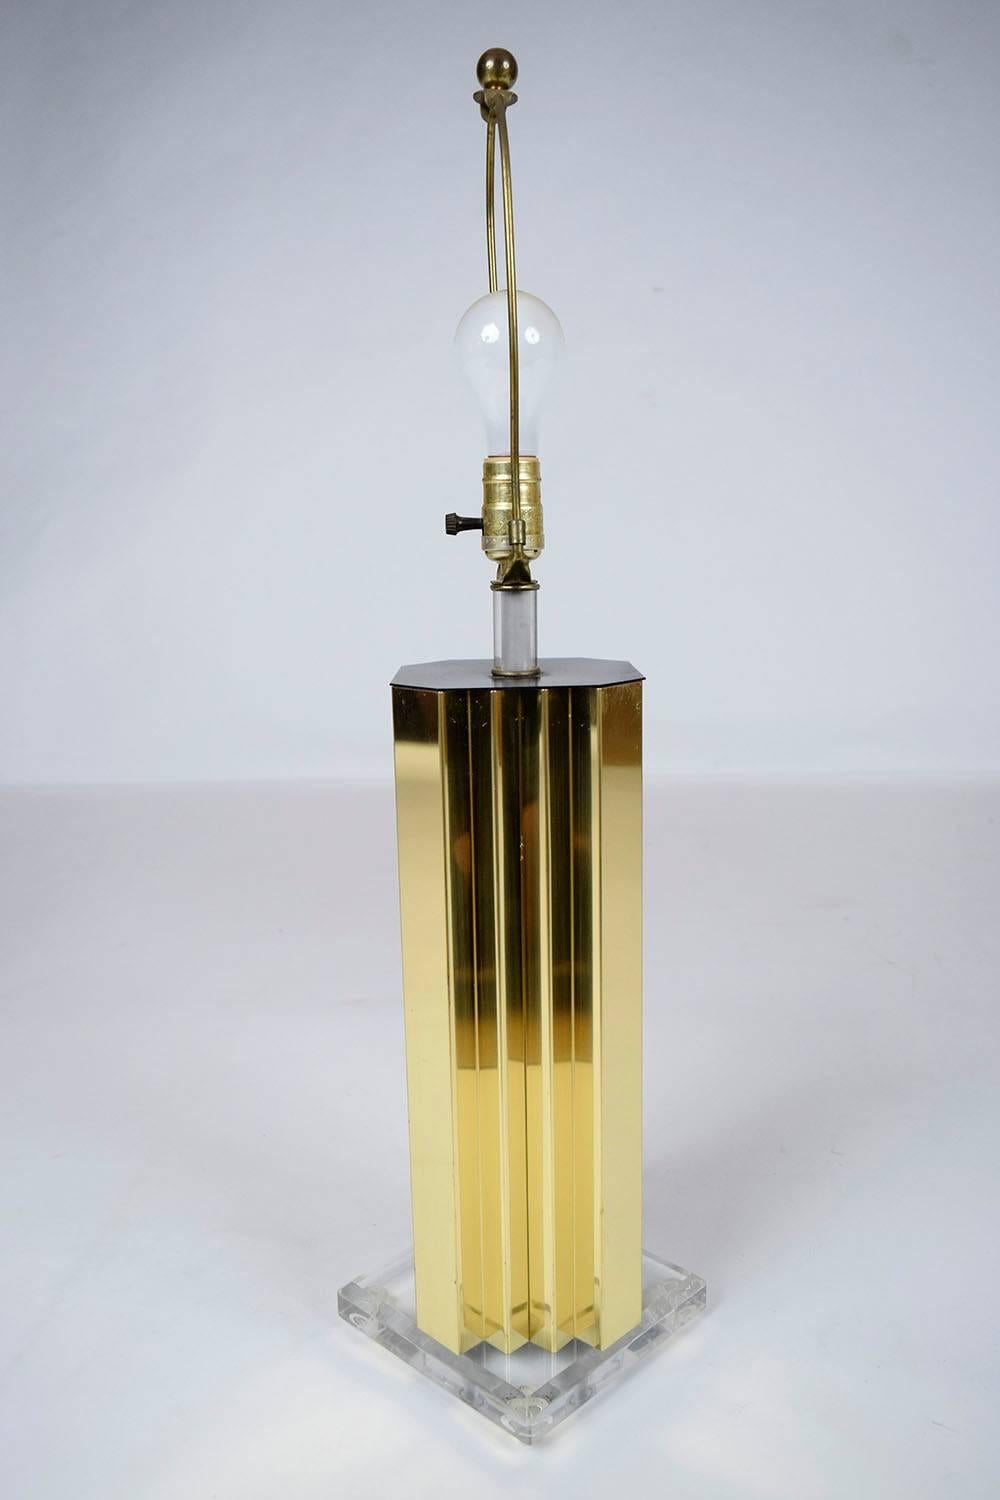 This single 1970's Mid Century Table Lamp is a statement piece that is sure to light up any room. The eye-catching geometric brass lamp pedestal sits atop a clear lucite base and comes with a new white fabric lampshade that complements the angles of